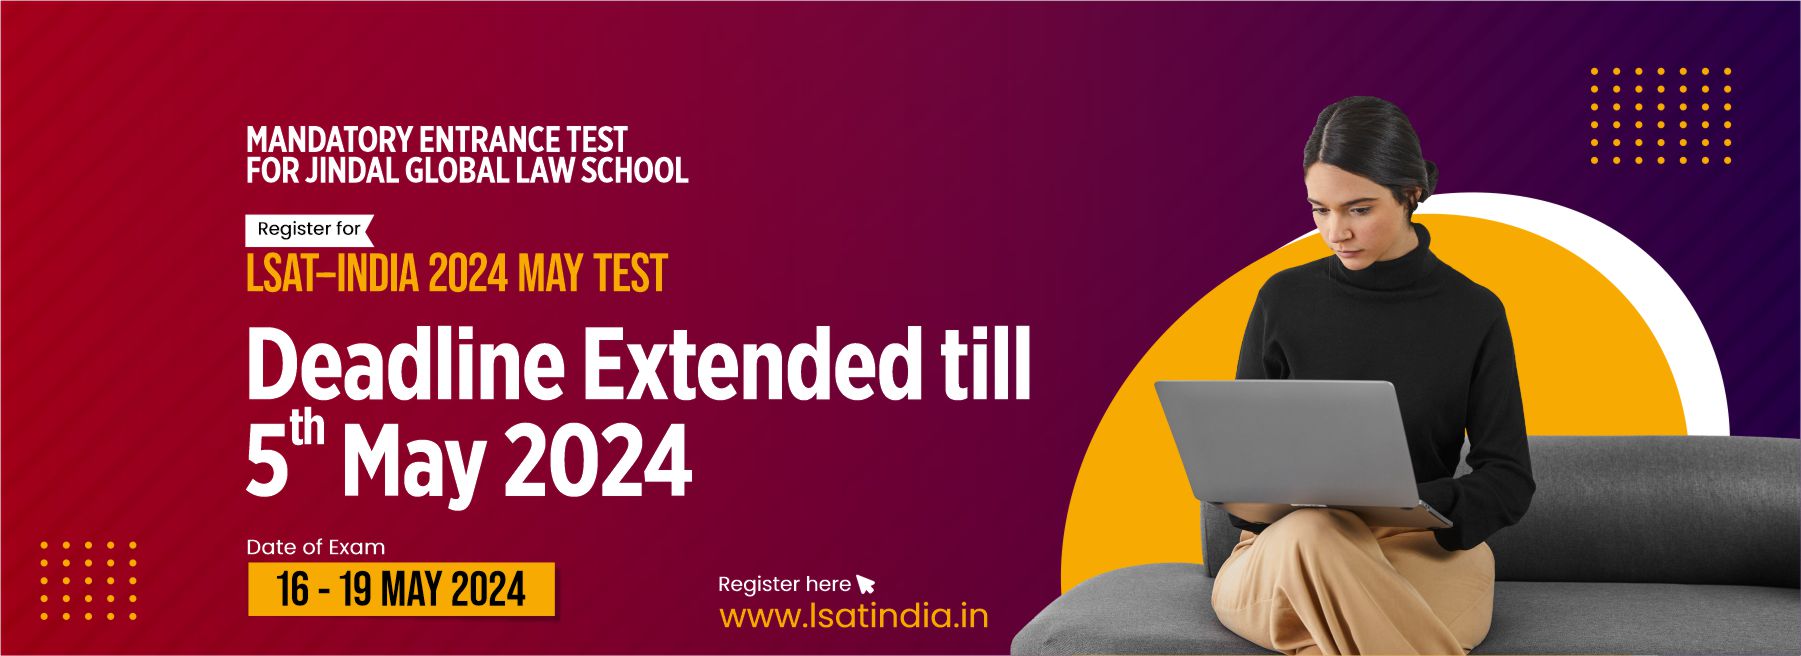 LSAT-INDIA 2024_DATE EXTENDED 5 MAY